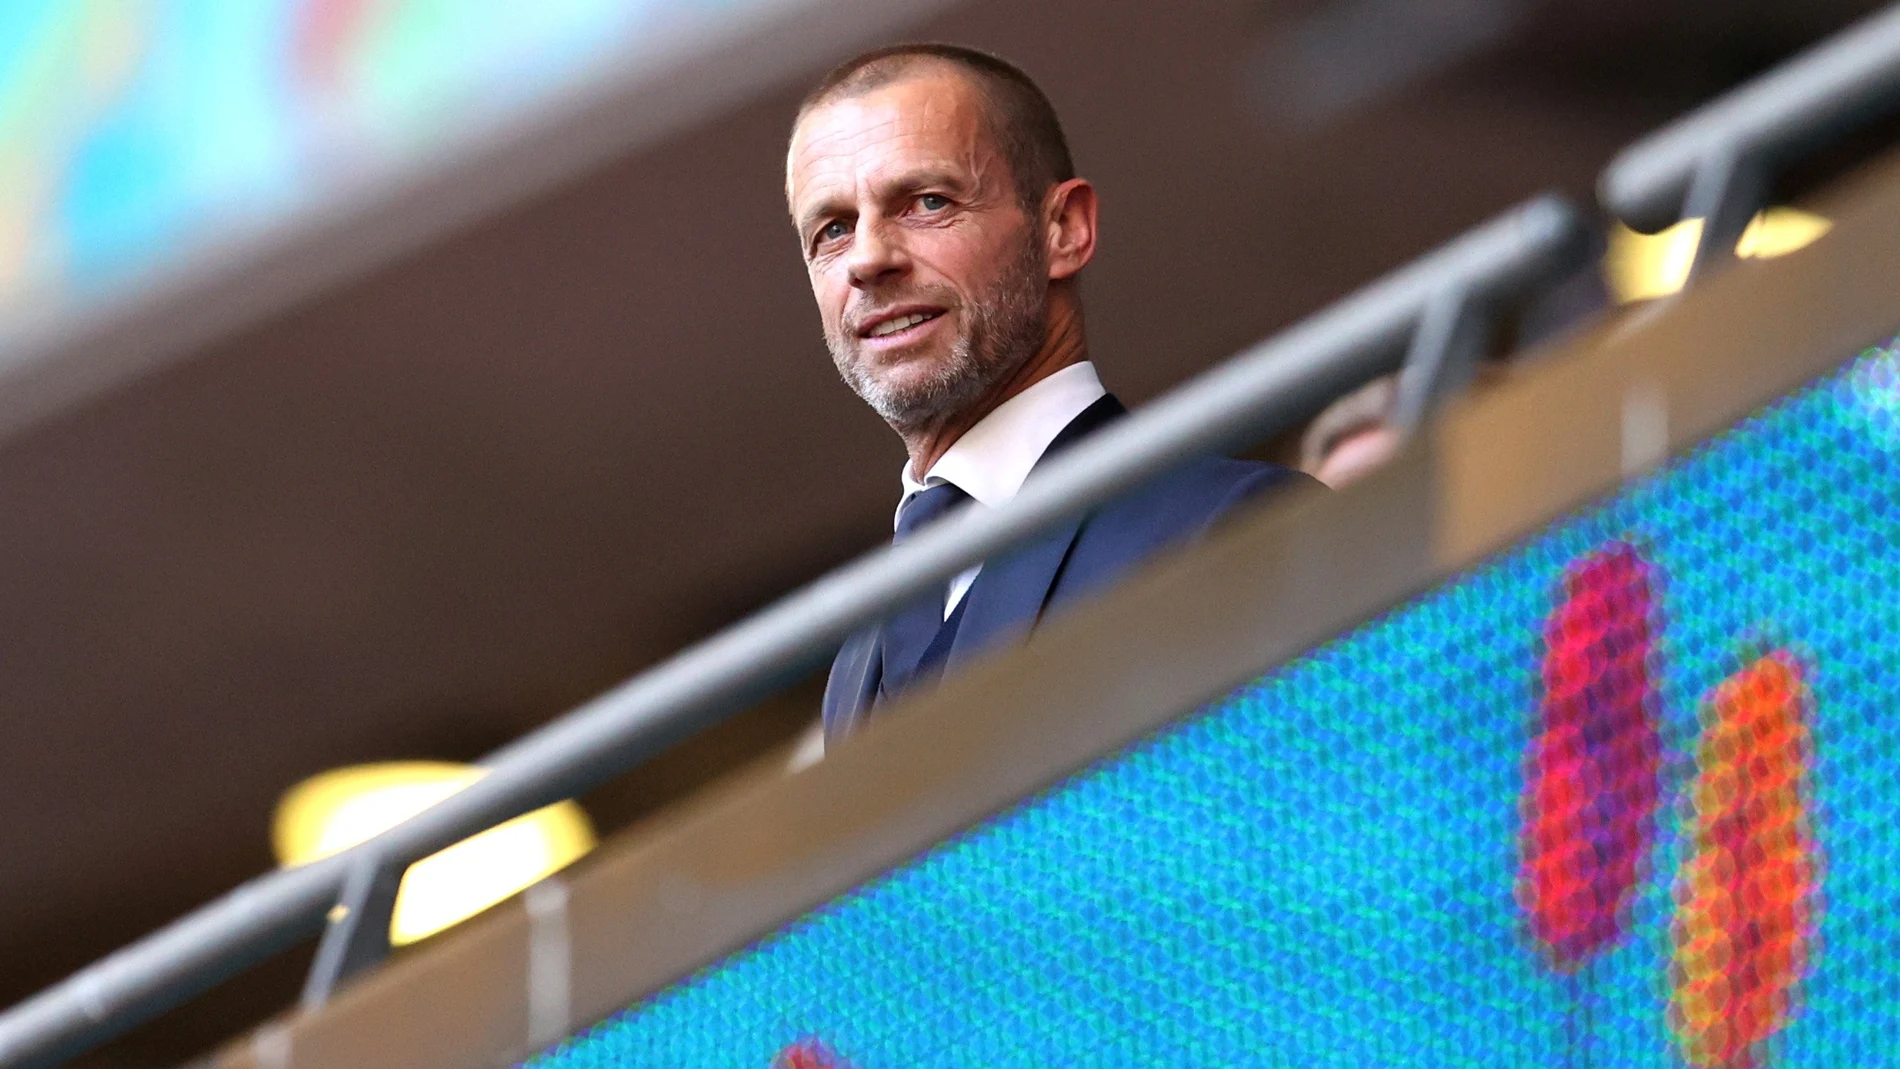 FILE PHOTO: Soccer Football - Euro 2020 - Semi Final - England v Denmark - Wembley Stadium, London, Britain - July 7, 2021 UEFA President Aleksander Ceferin in the stands before the match Pool via REUTERS/Catherine Ivill/File Photo